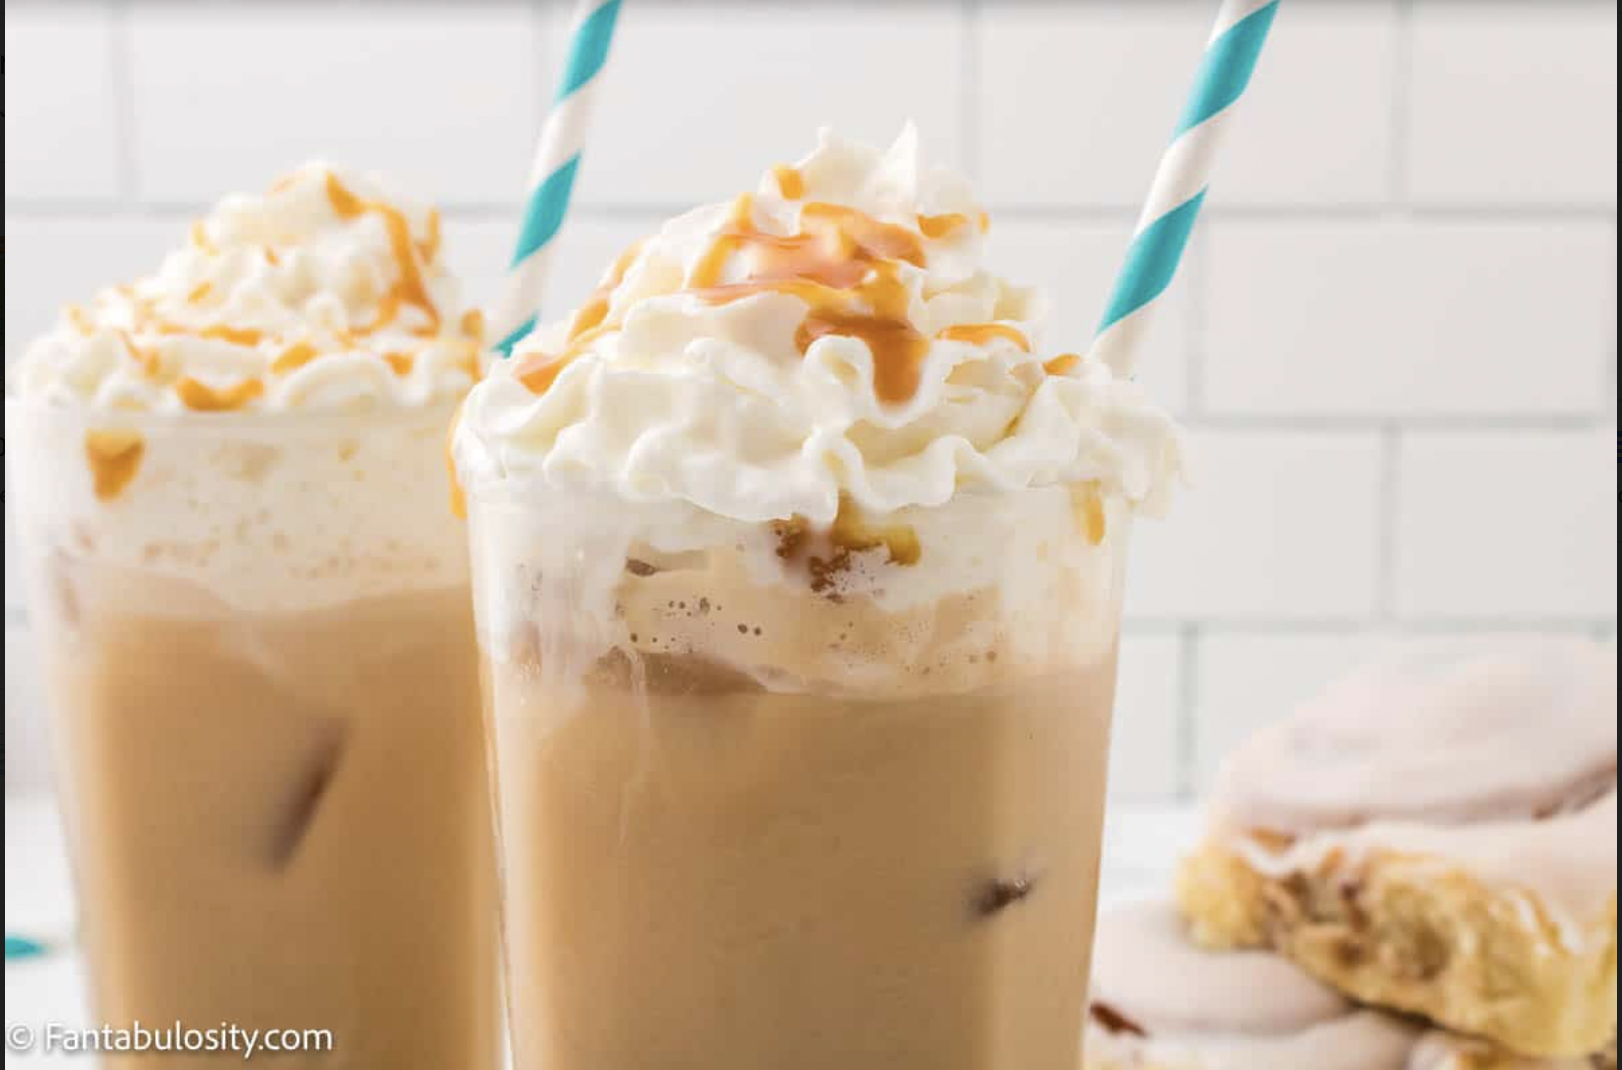 The caramel in this iced caramel latte ties in perfectly with autumn flavors! It’s the perfect cold drink on a warmer autumn afternoon while browsing the pumpkin patch!<p><b><a href="https://fantabulosity.com/iced-caramel-latte/">Get recipe</a></b></p>